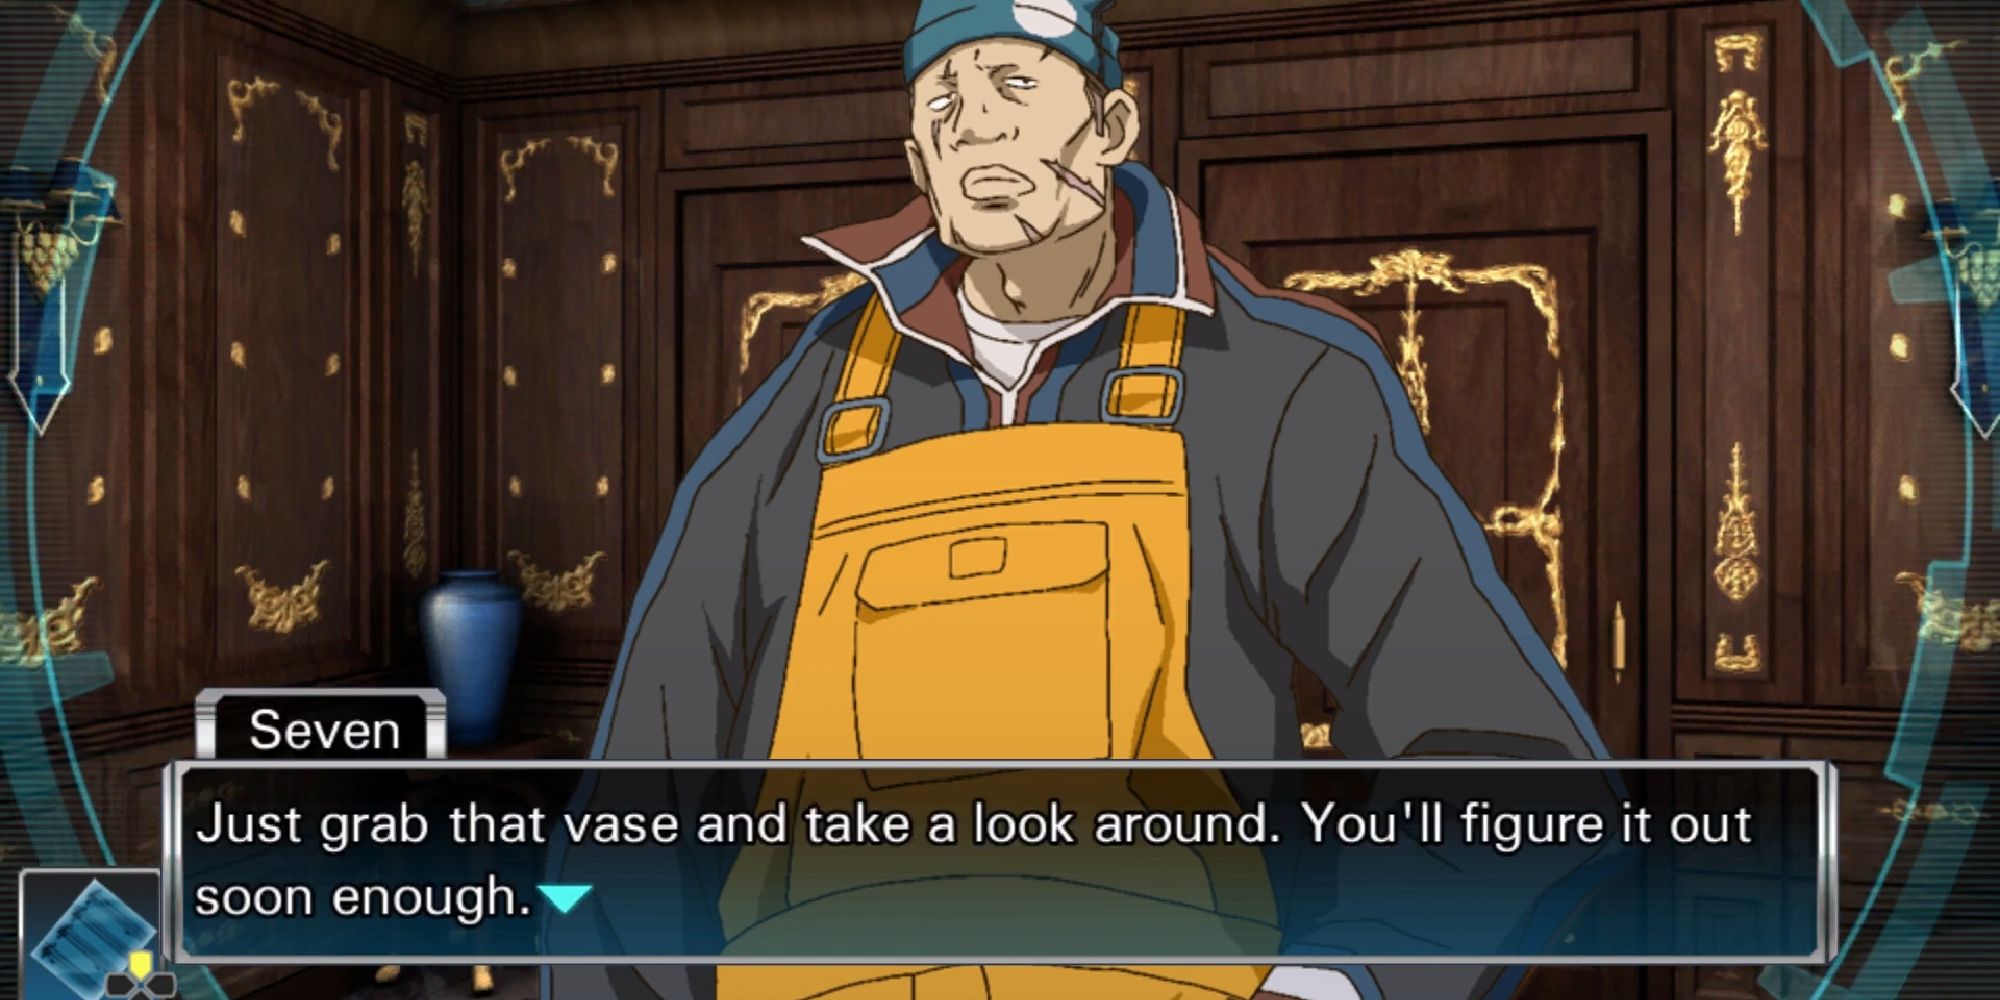 seven telling junpei to grab the vase